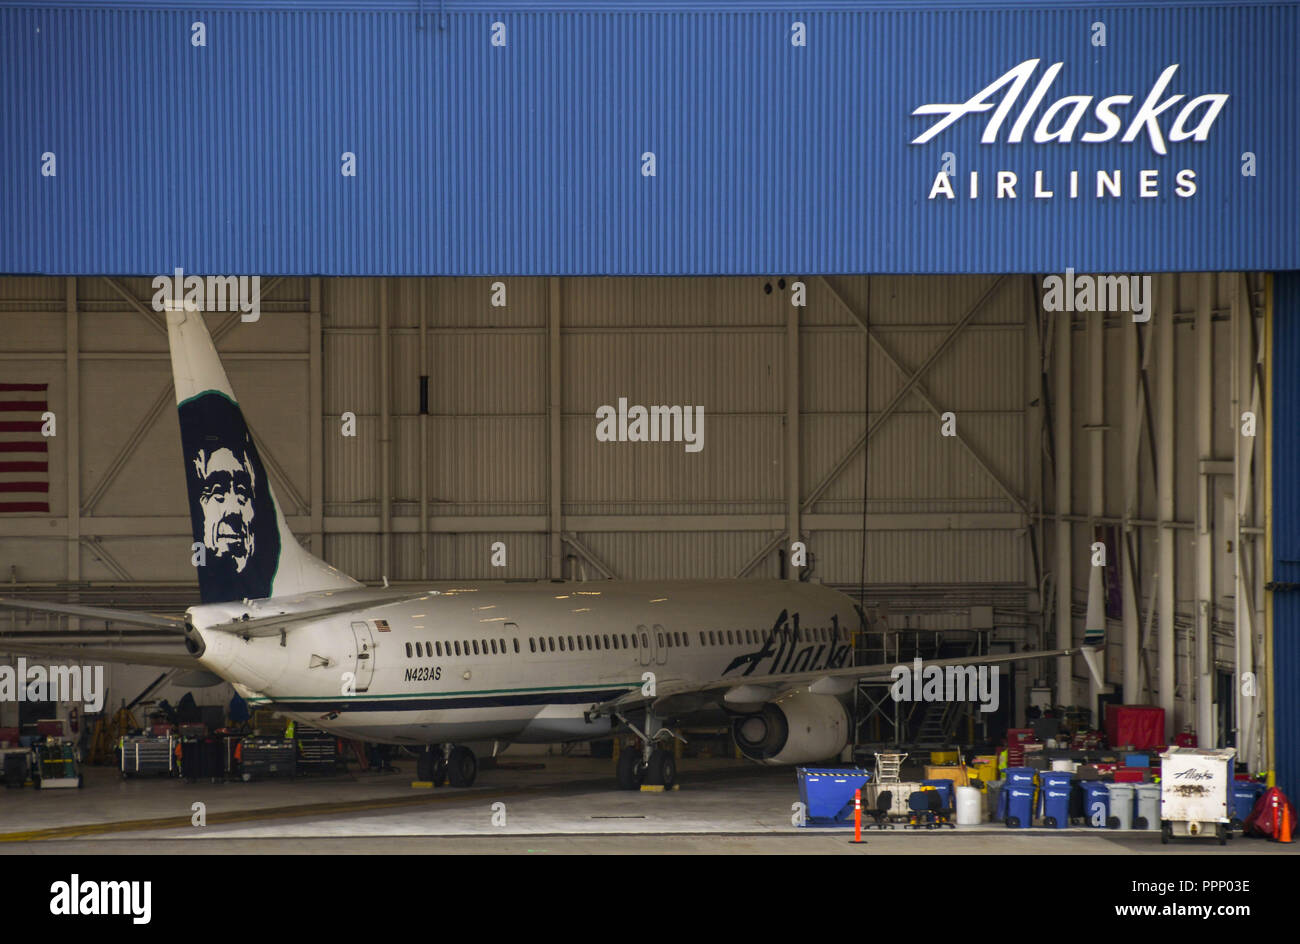 Boeing 737 jet in the Alaskan Airlines hangar at Seattle Tacoma airport for servicing. Stock Photo